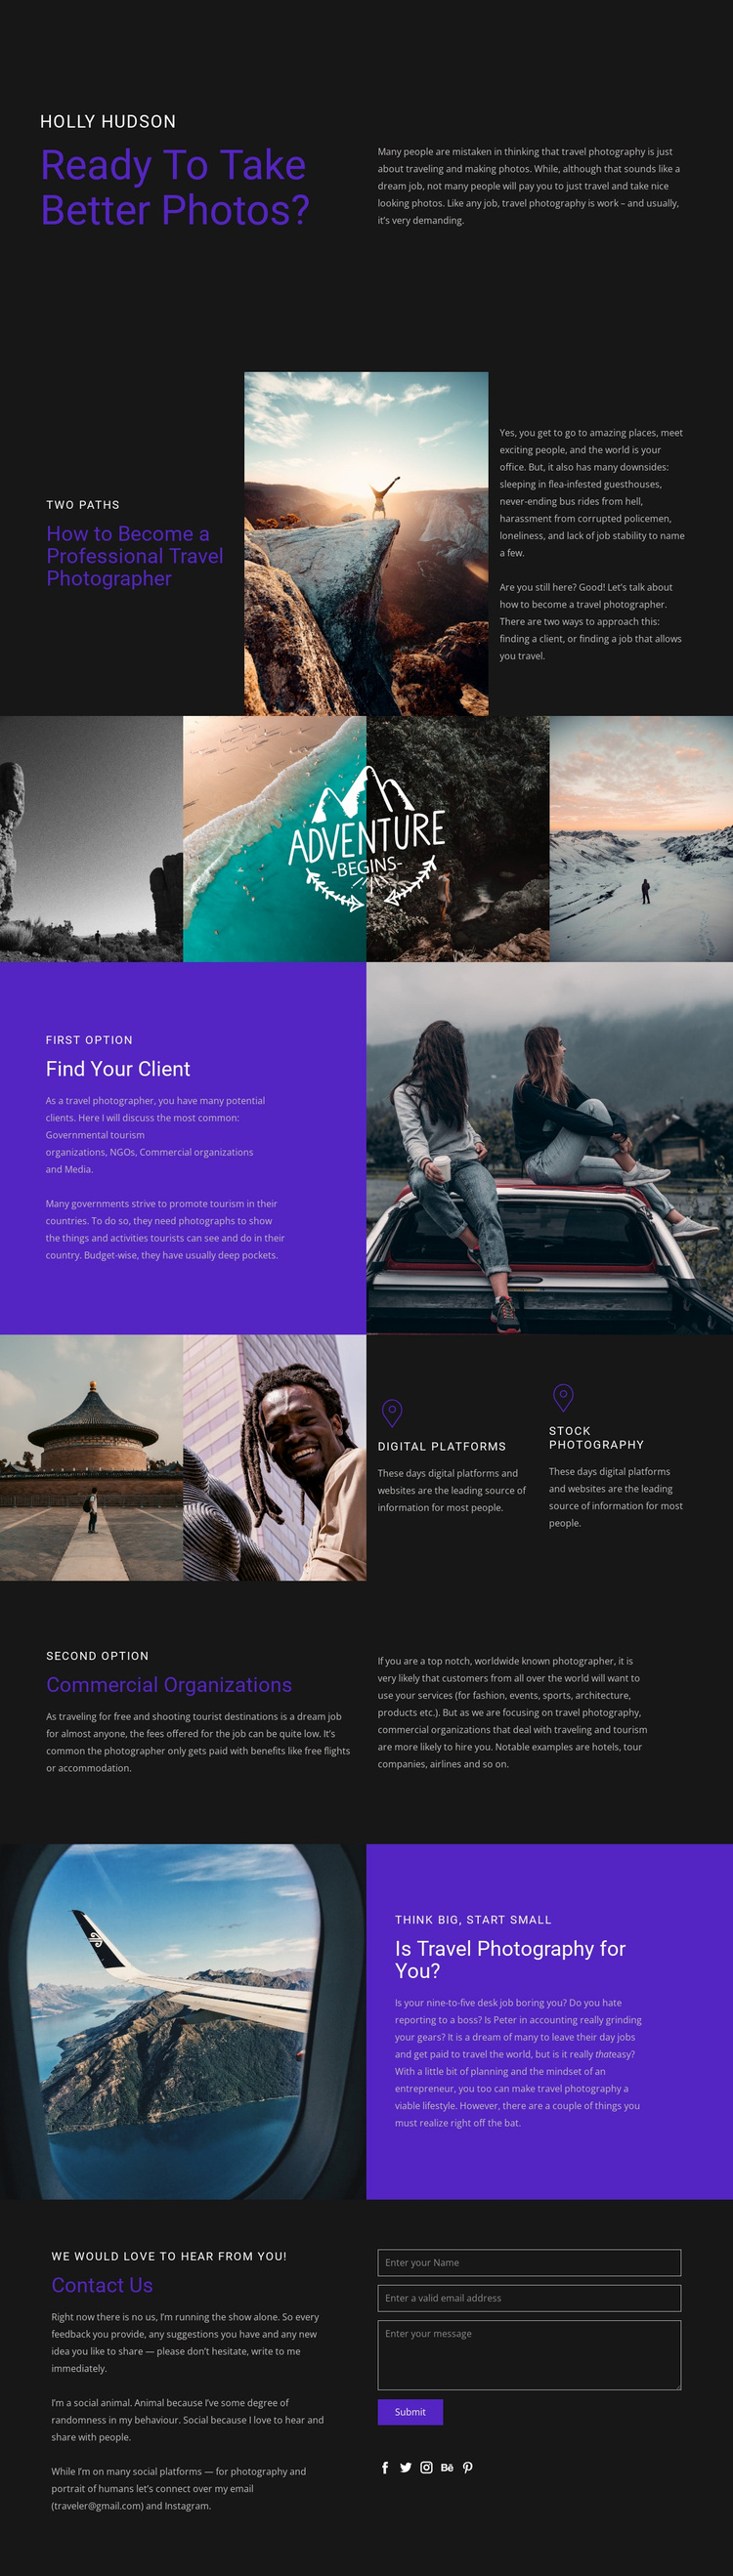 Travel and photography Website Design